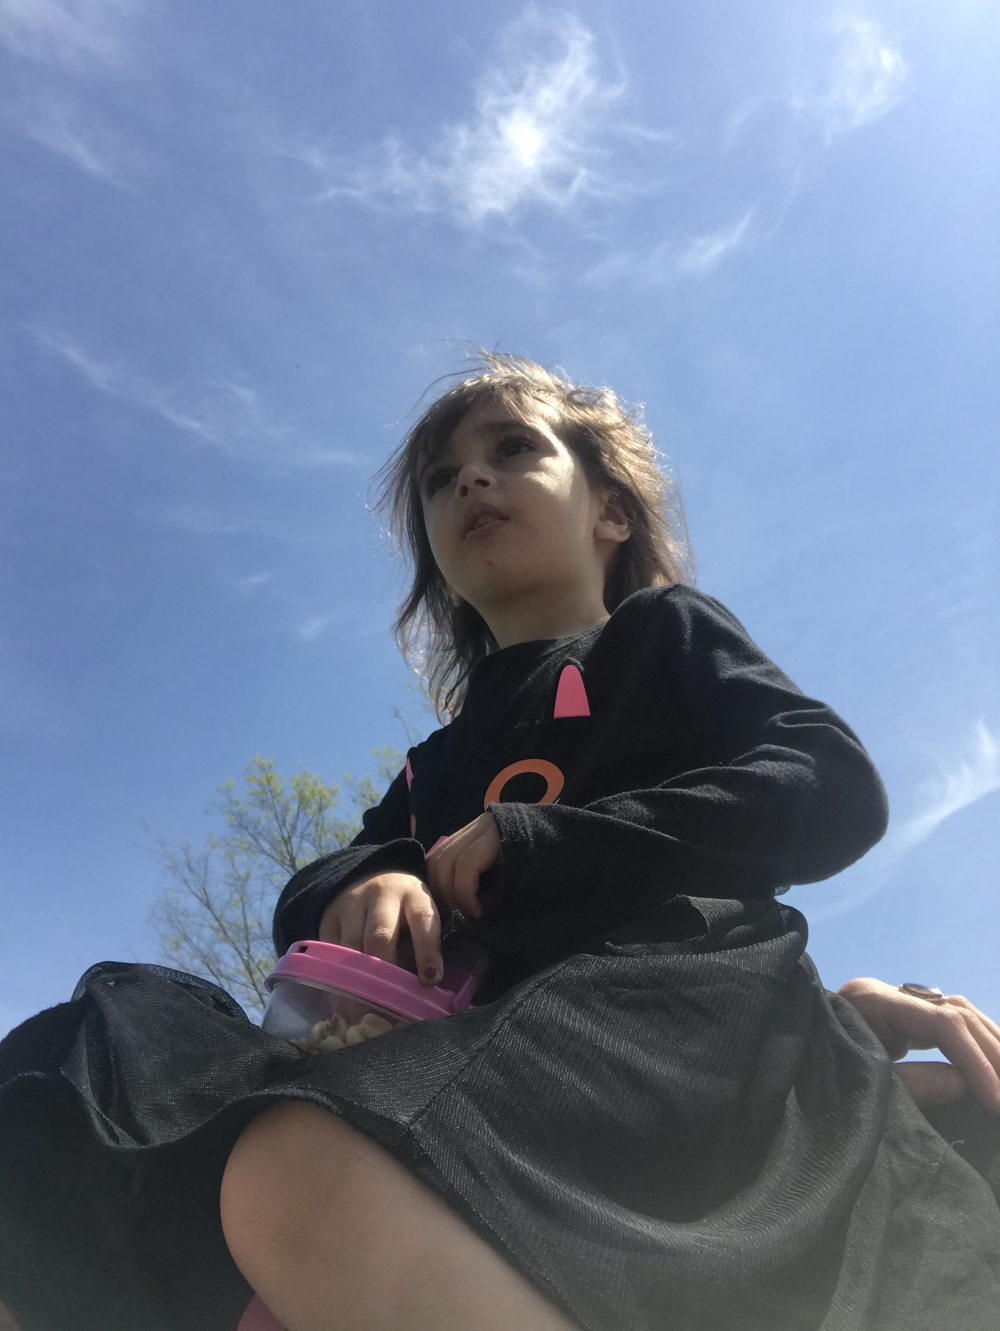 A toddler girl wearing a black cat shirt and a black skirt is photographed from below. She is sitting down and looking off into the distance. In her hands is a container full of snacks. Photo by Darya Shahgheibi.